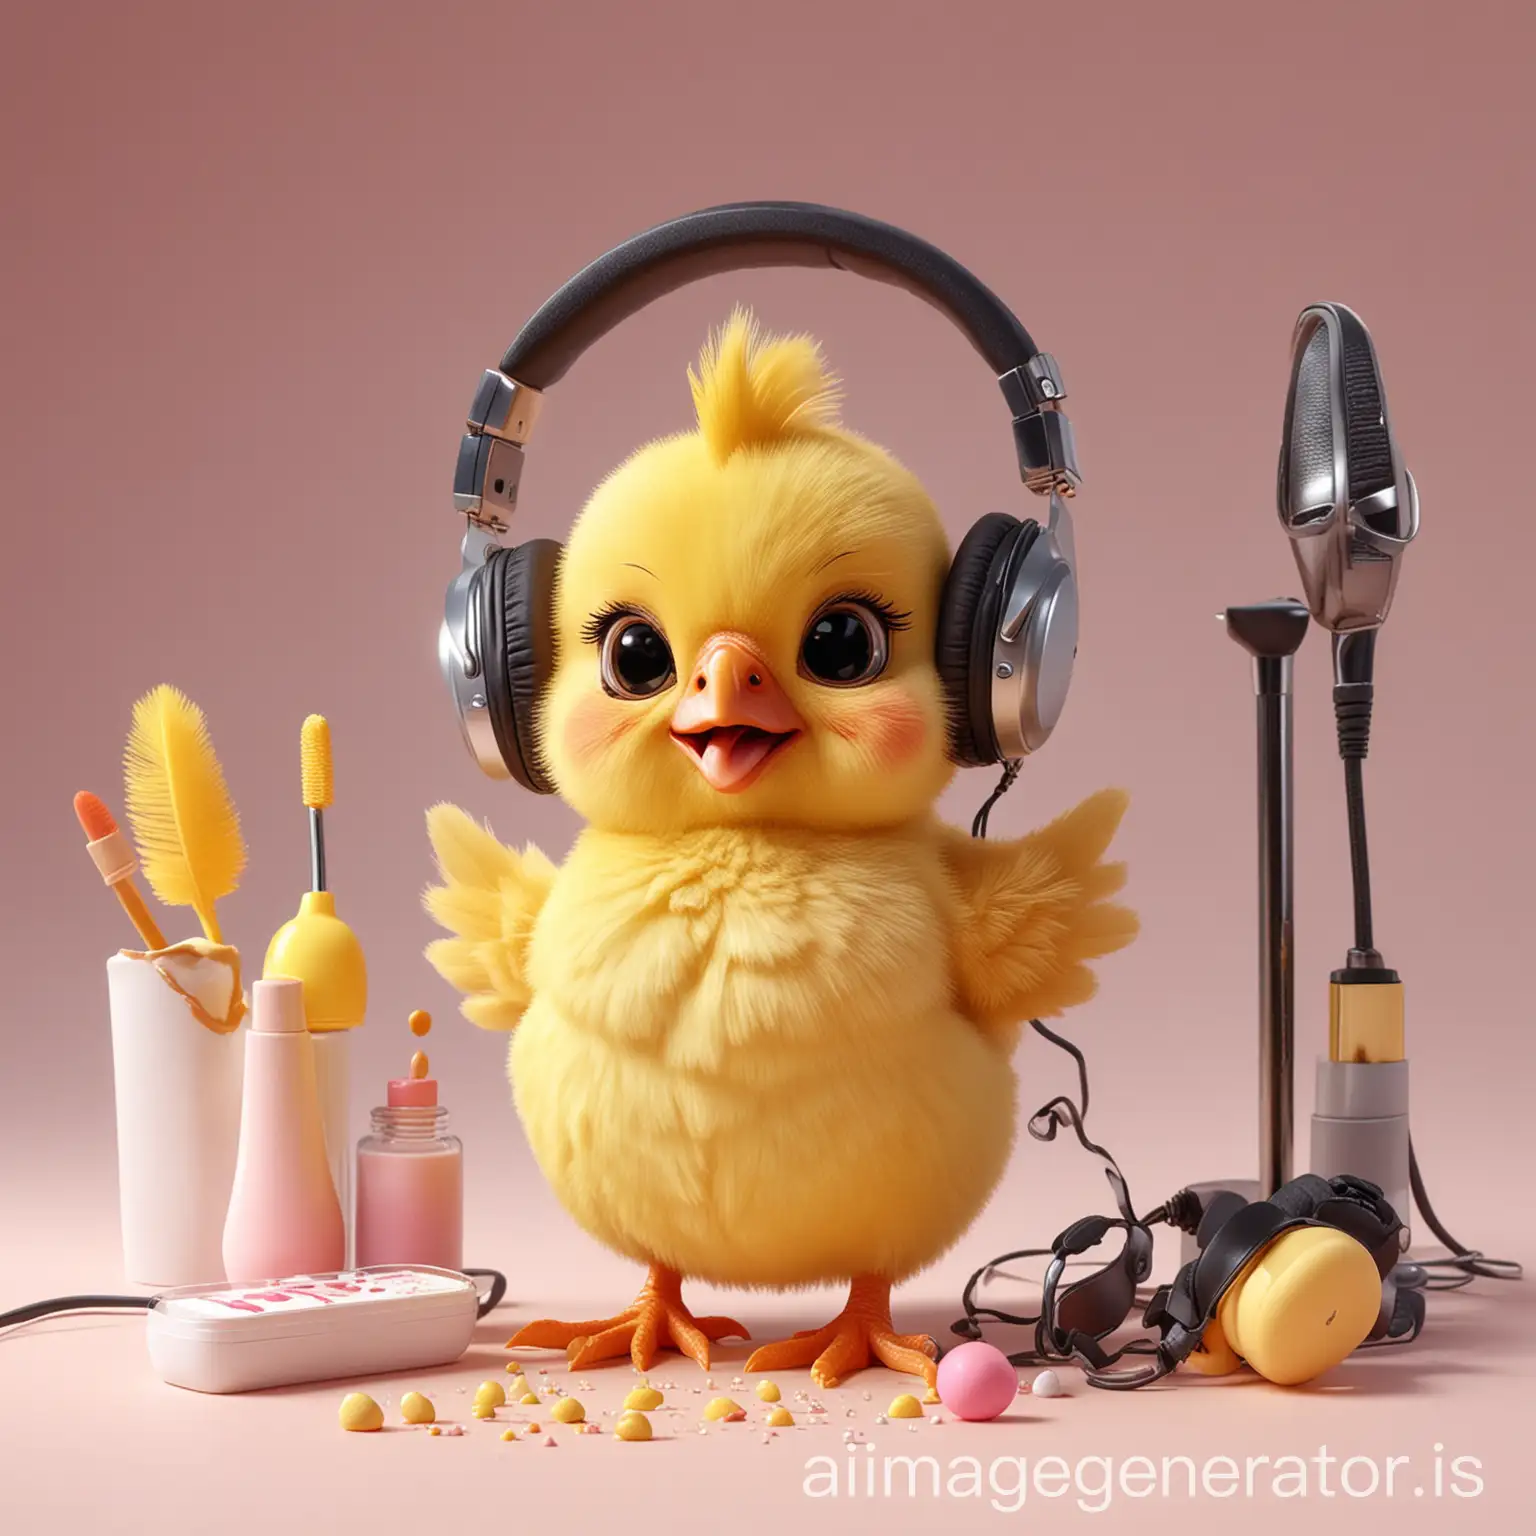 Adorable-Yellow-Baby-Chicken-Cartoon-with-Makeup-Accessories-and-Headphones